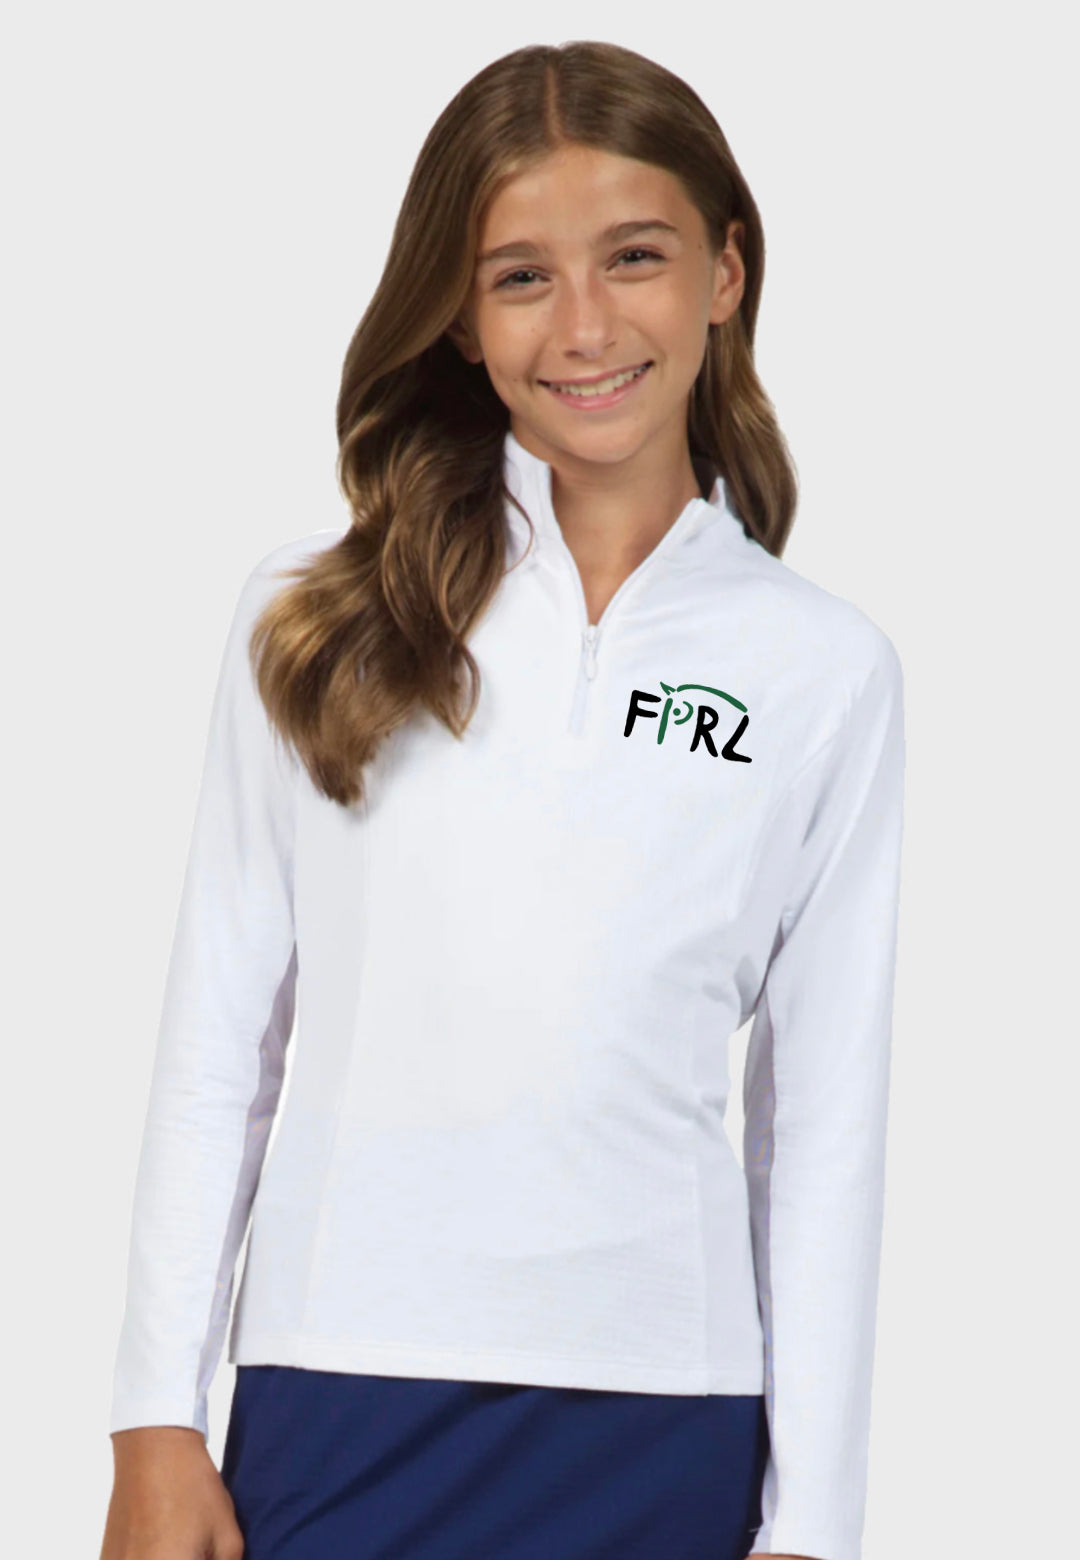 Flanders Polo IBKÜL® Long Sleeve Sun Shirt - Ladies + Youth Sizes, 2 Color options